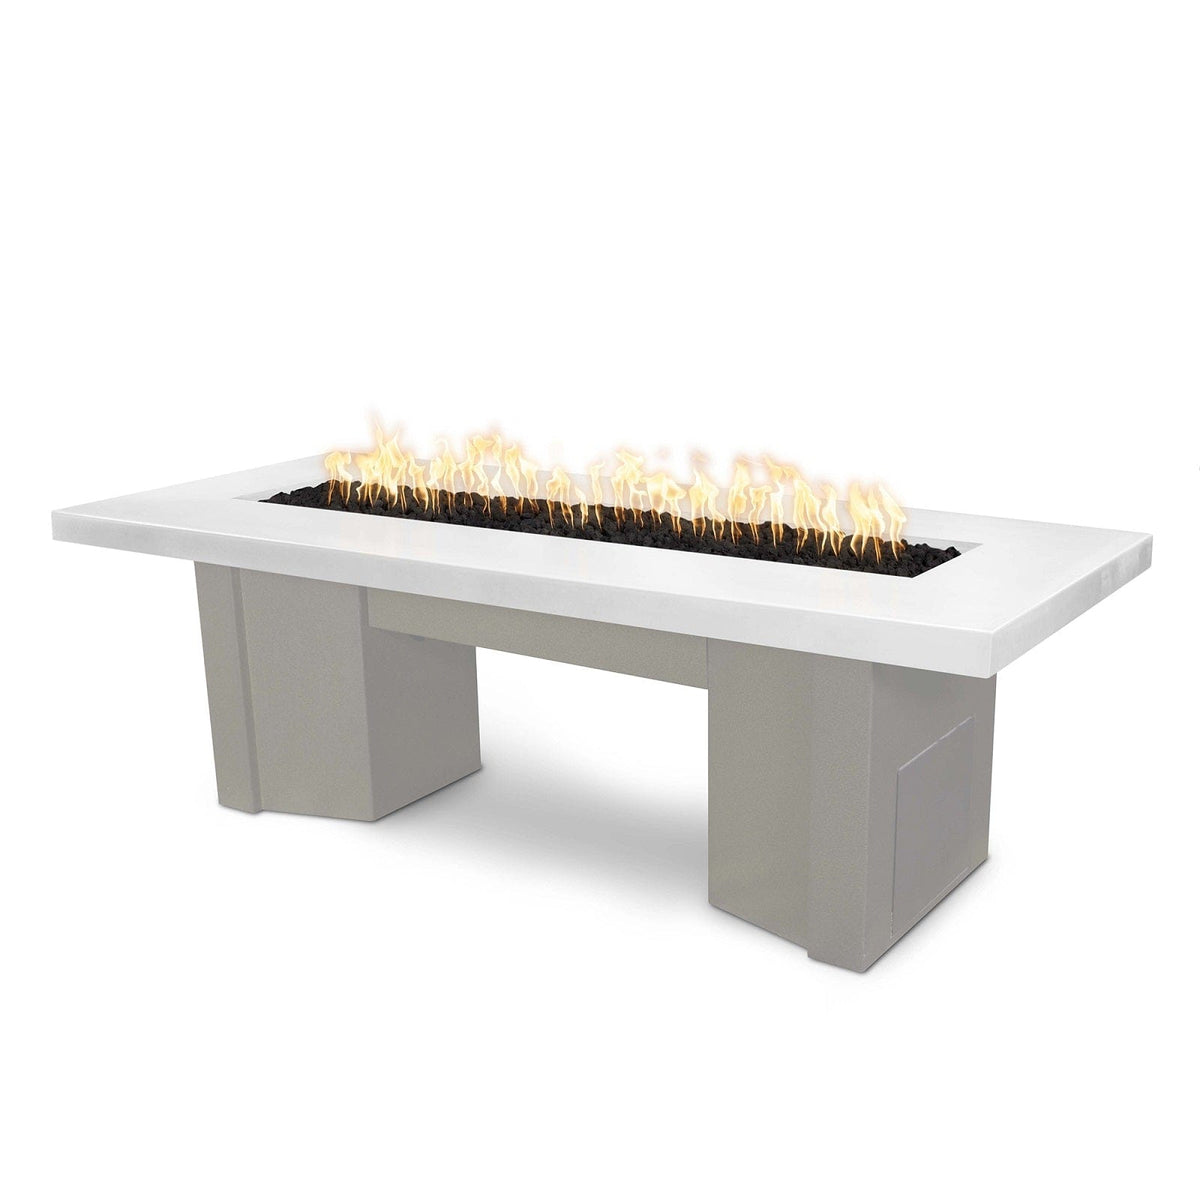 The Outdoor Plus Fire Features Limestone (-LIM) / Pewter Powder Coated Steel (-PEW) The Outdoor Plus 78&quot; Alameda Fire Table Smooth Concrete in Liquid Propane - Match Lit with Flame Sense System / OPT-ALMGFRC78FSML-LP